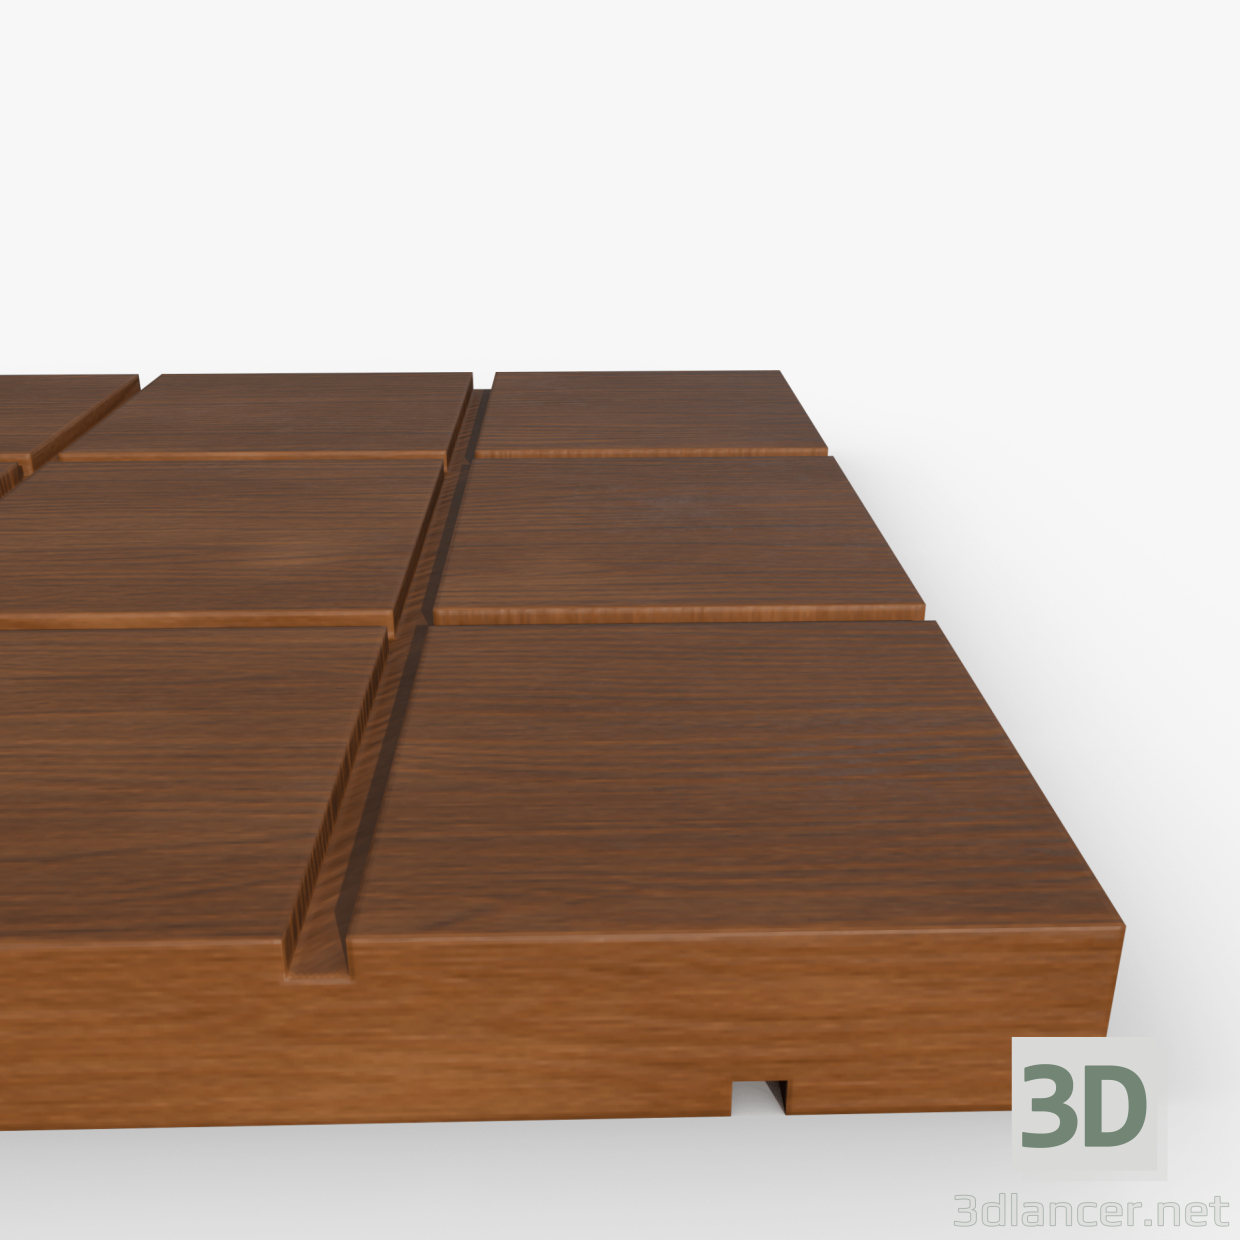 3d Stand for hot IKEA Square 160mm model buy - render